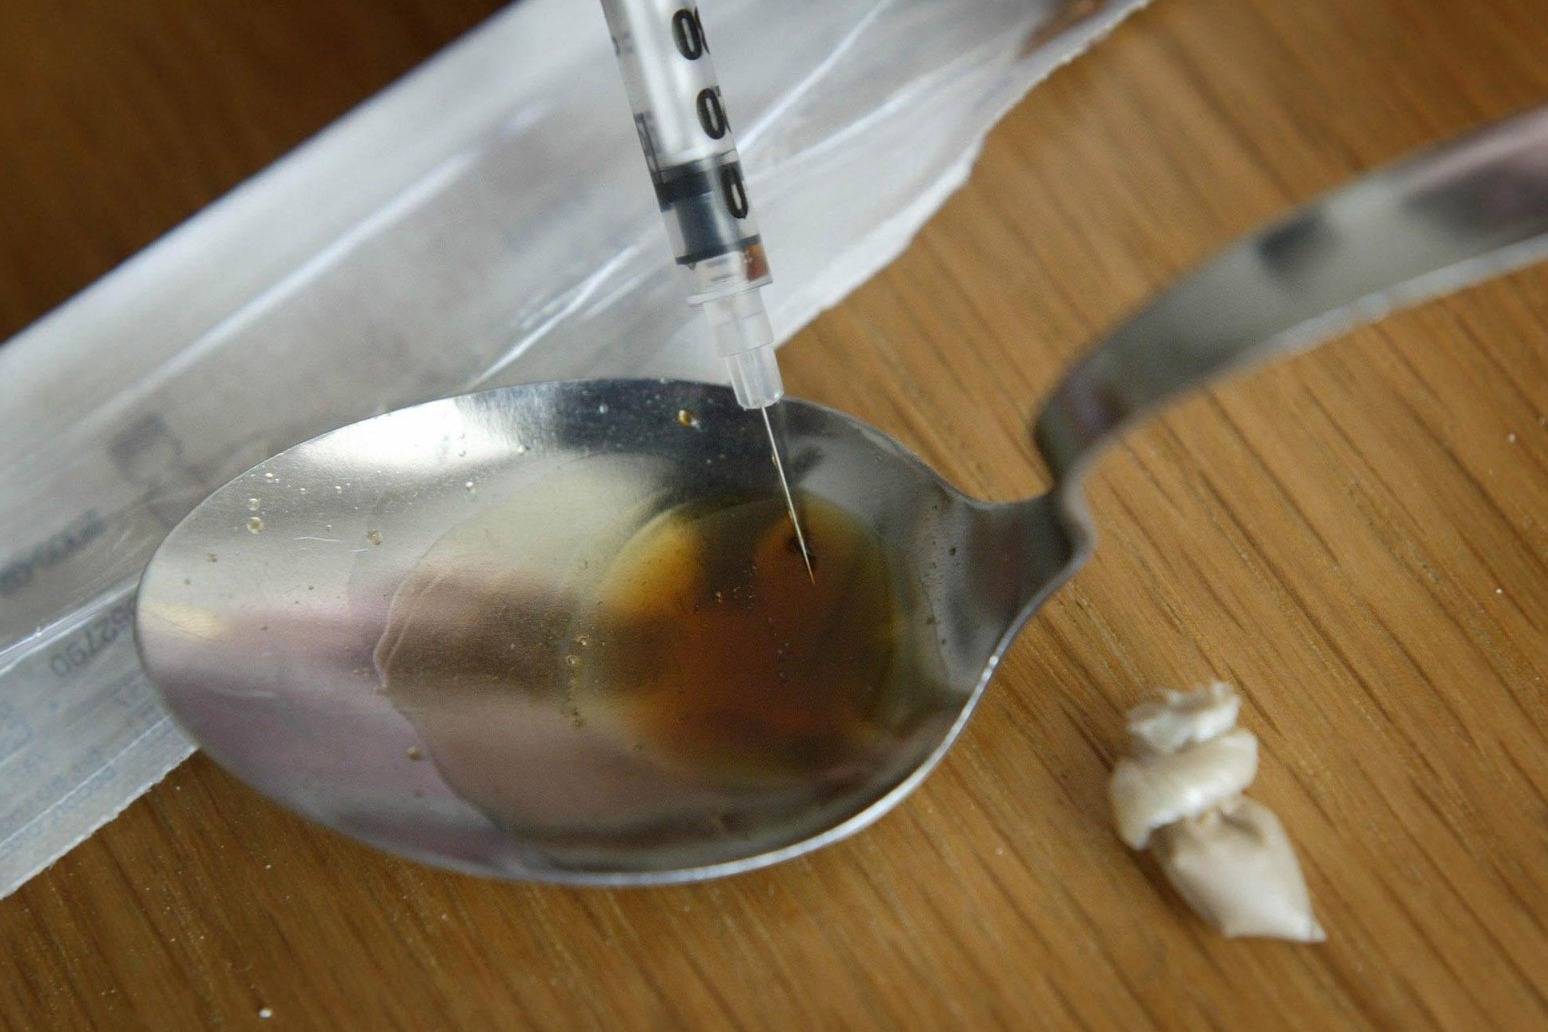 UK’s first drug consumption room enabling supervised injection approved 